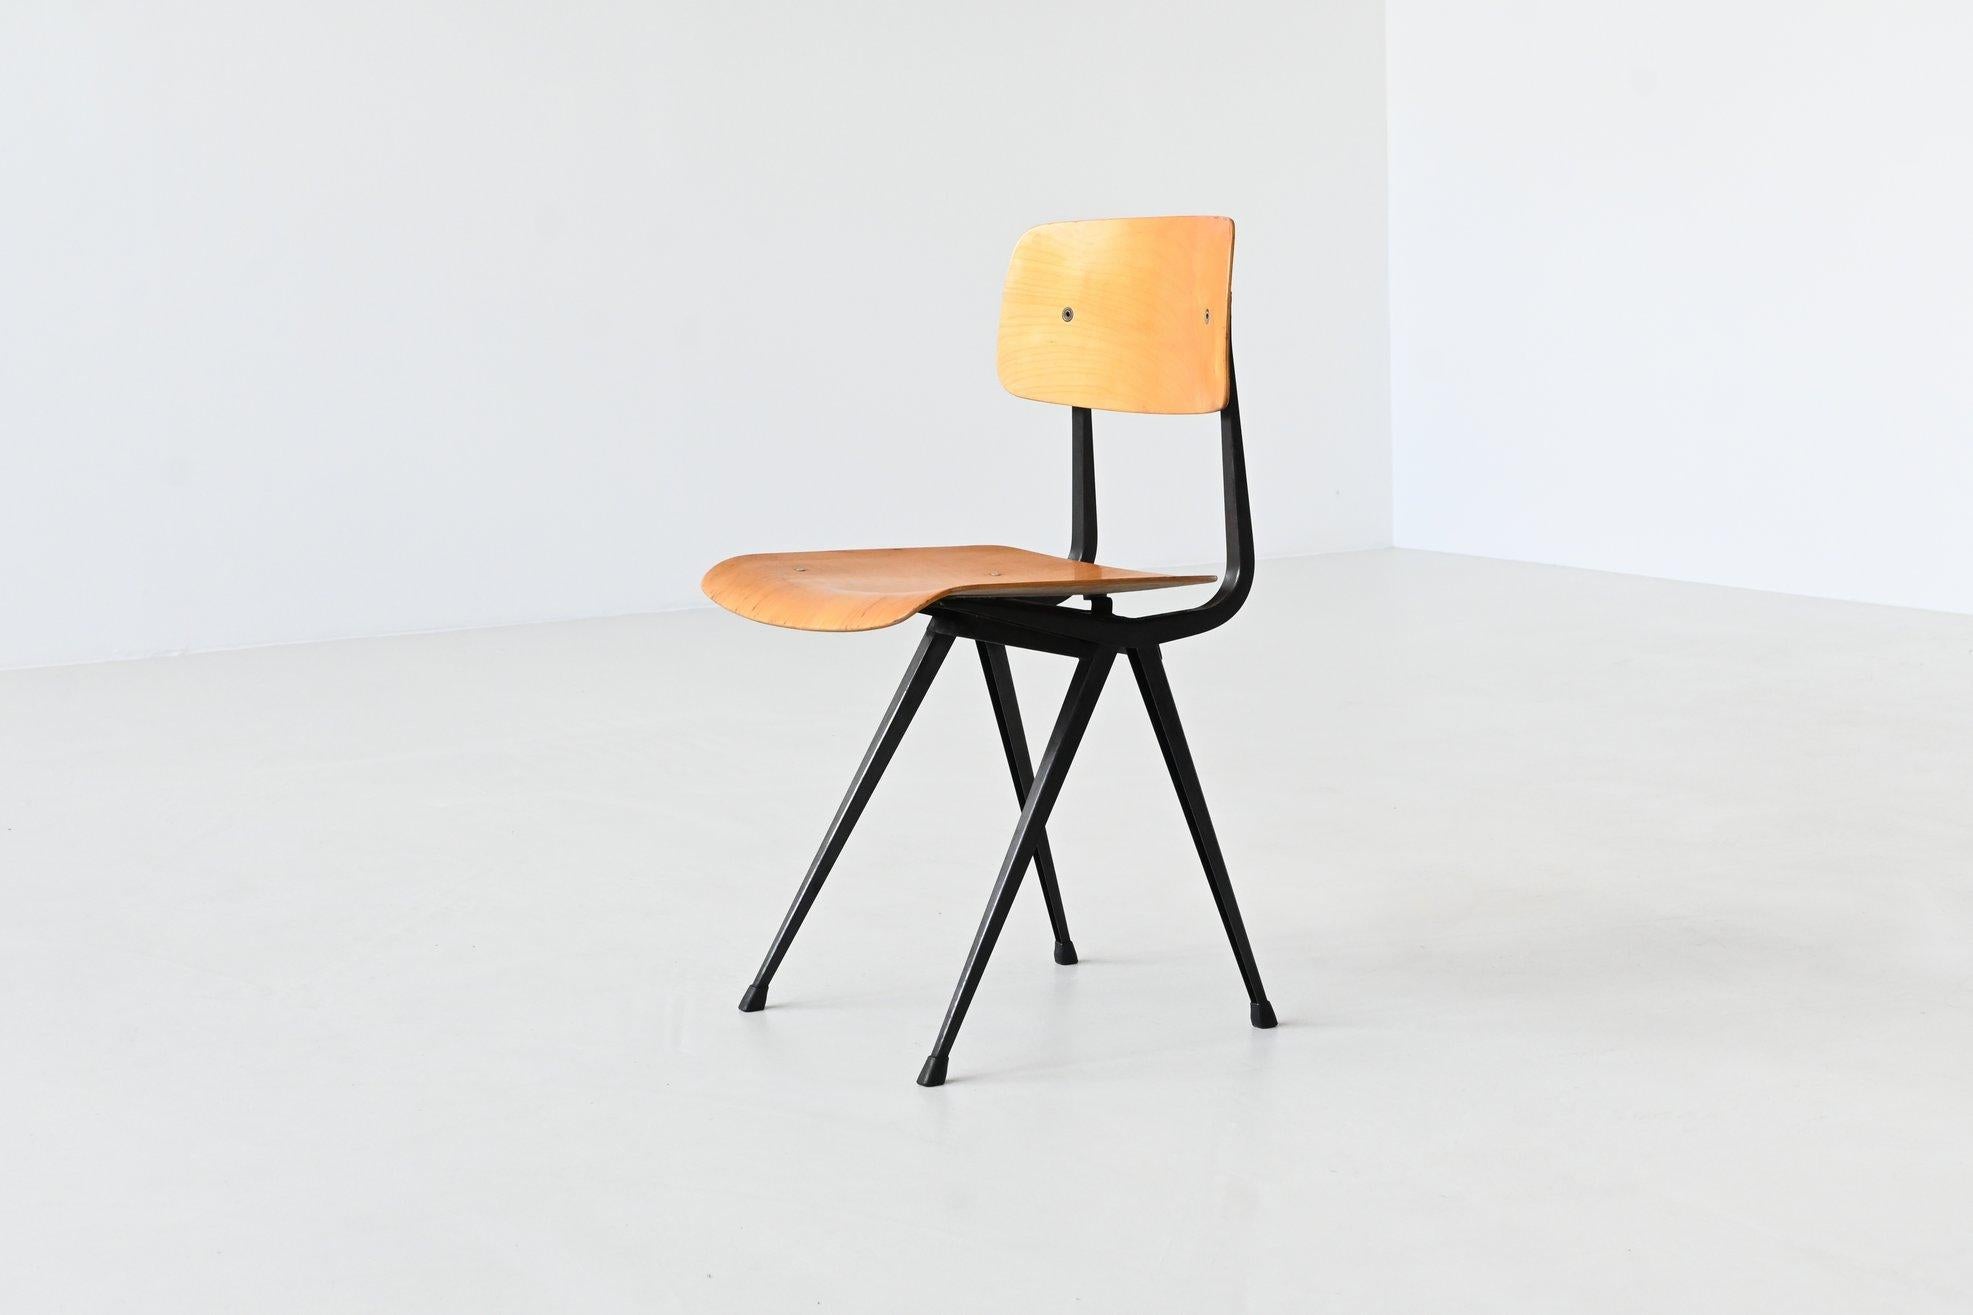 Very nice iconic chair model Result designed by Friso Kramer for Ahrend de Cirkel, The Netherlands 1958. The chair has an original black lacquered metal frame with V structure legs which is very nice in combination with the birch plywood seat and